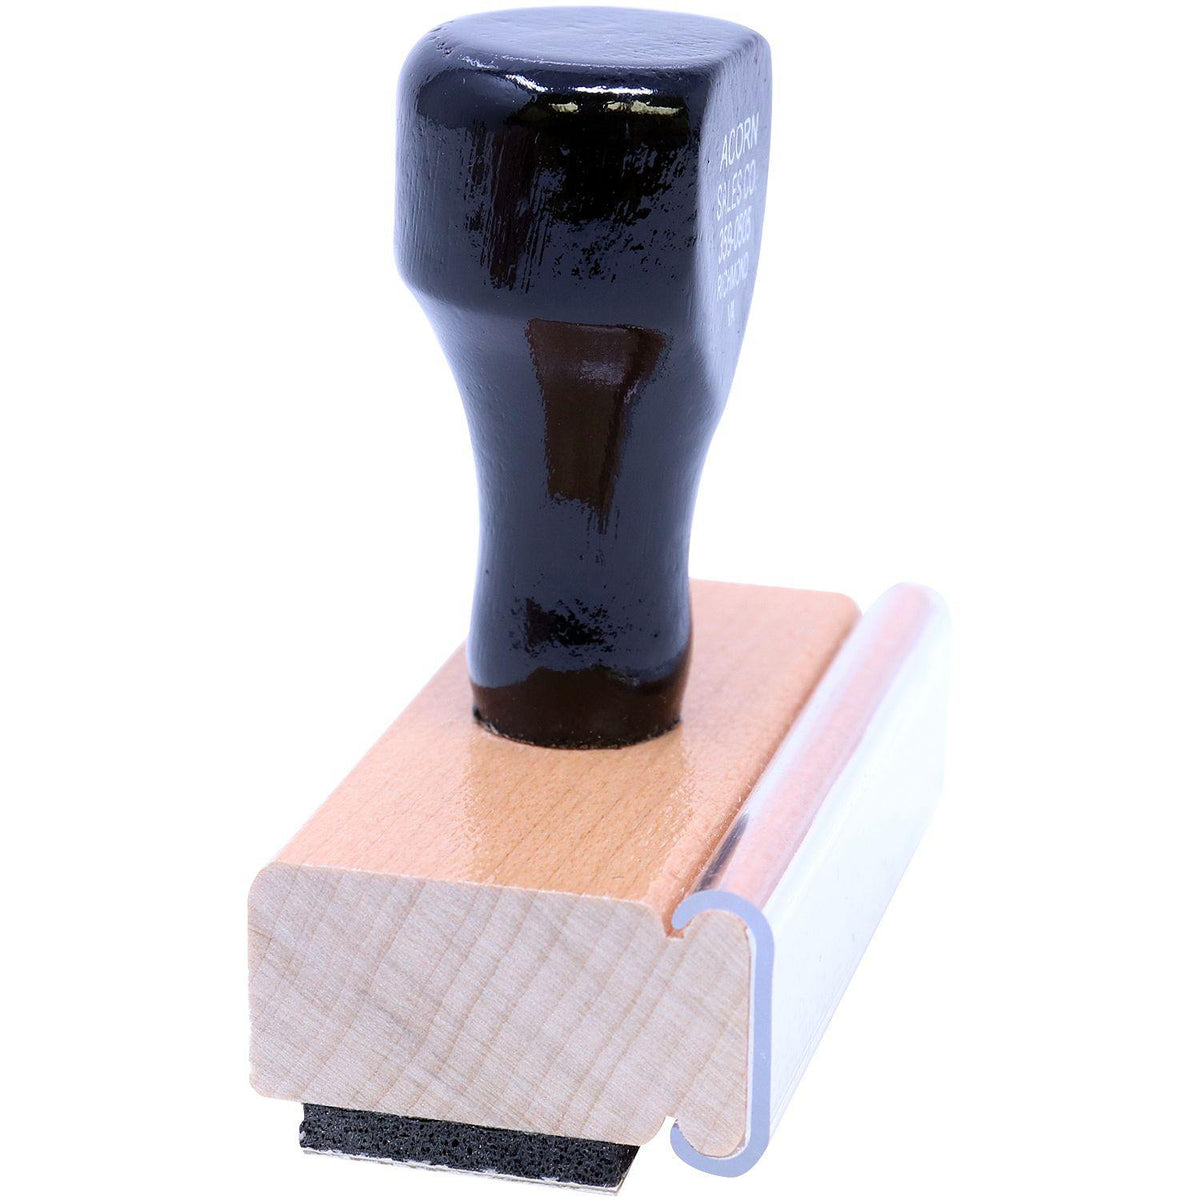 Paid Rubber Stamp - Engineer Seal Stamps - Brand_Acorn, Impression Size_Small, Stamp Type_Regular Stamp, Type of Use_Business, Type of Use_Finance